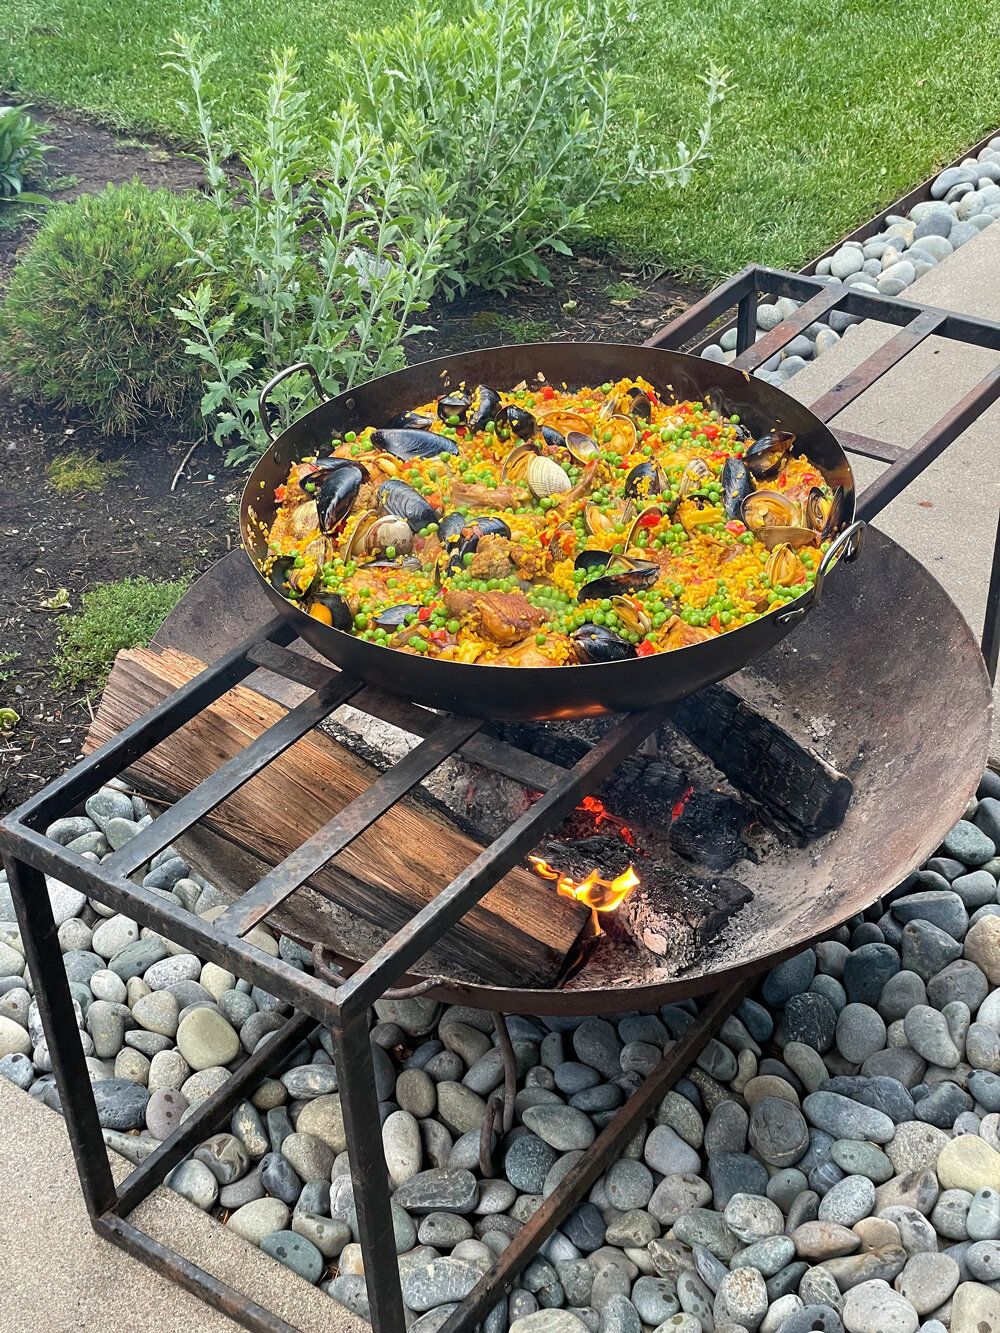 Paella Party at the Herdic